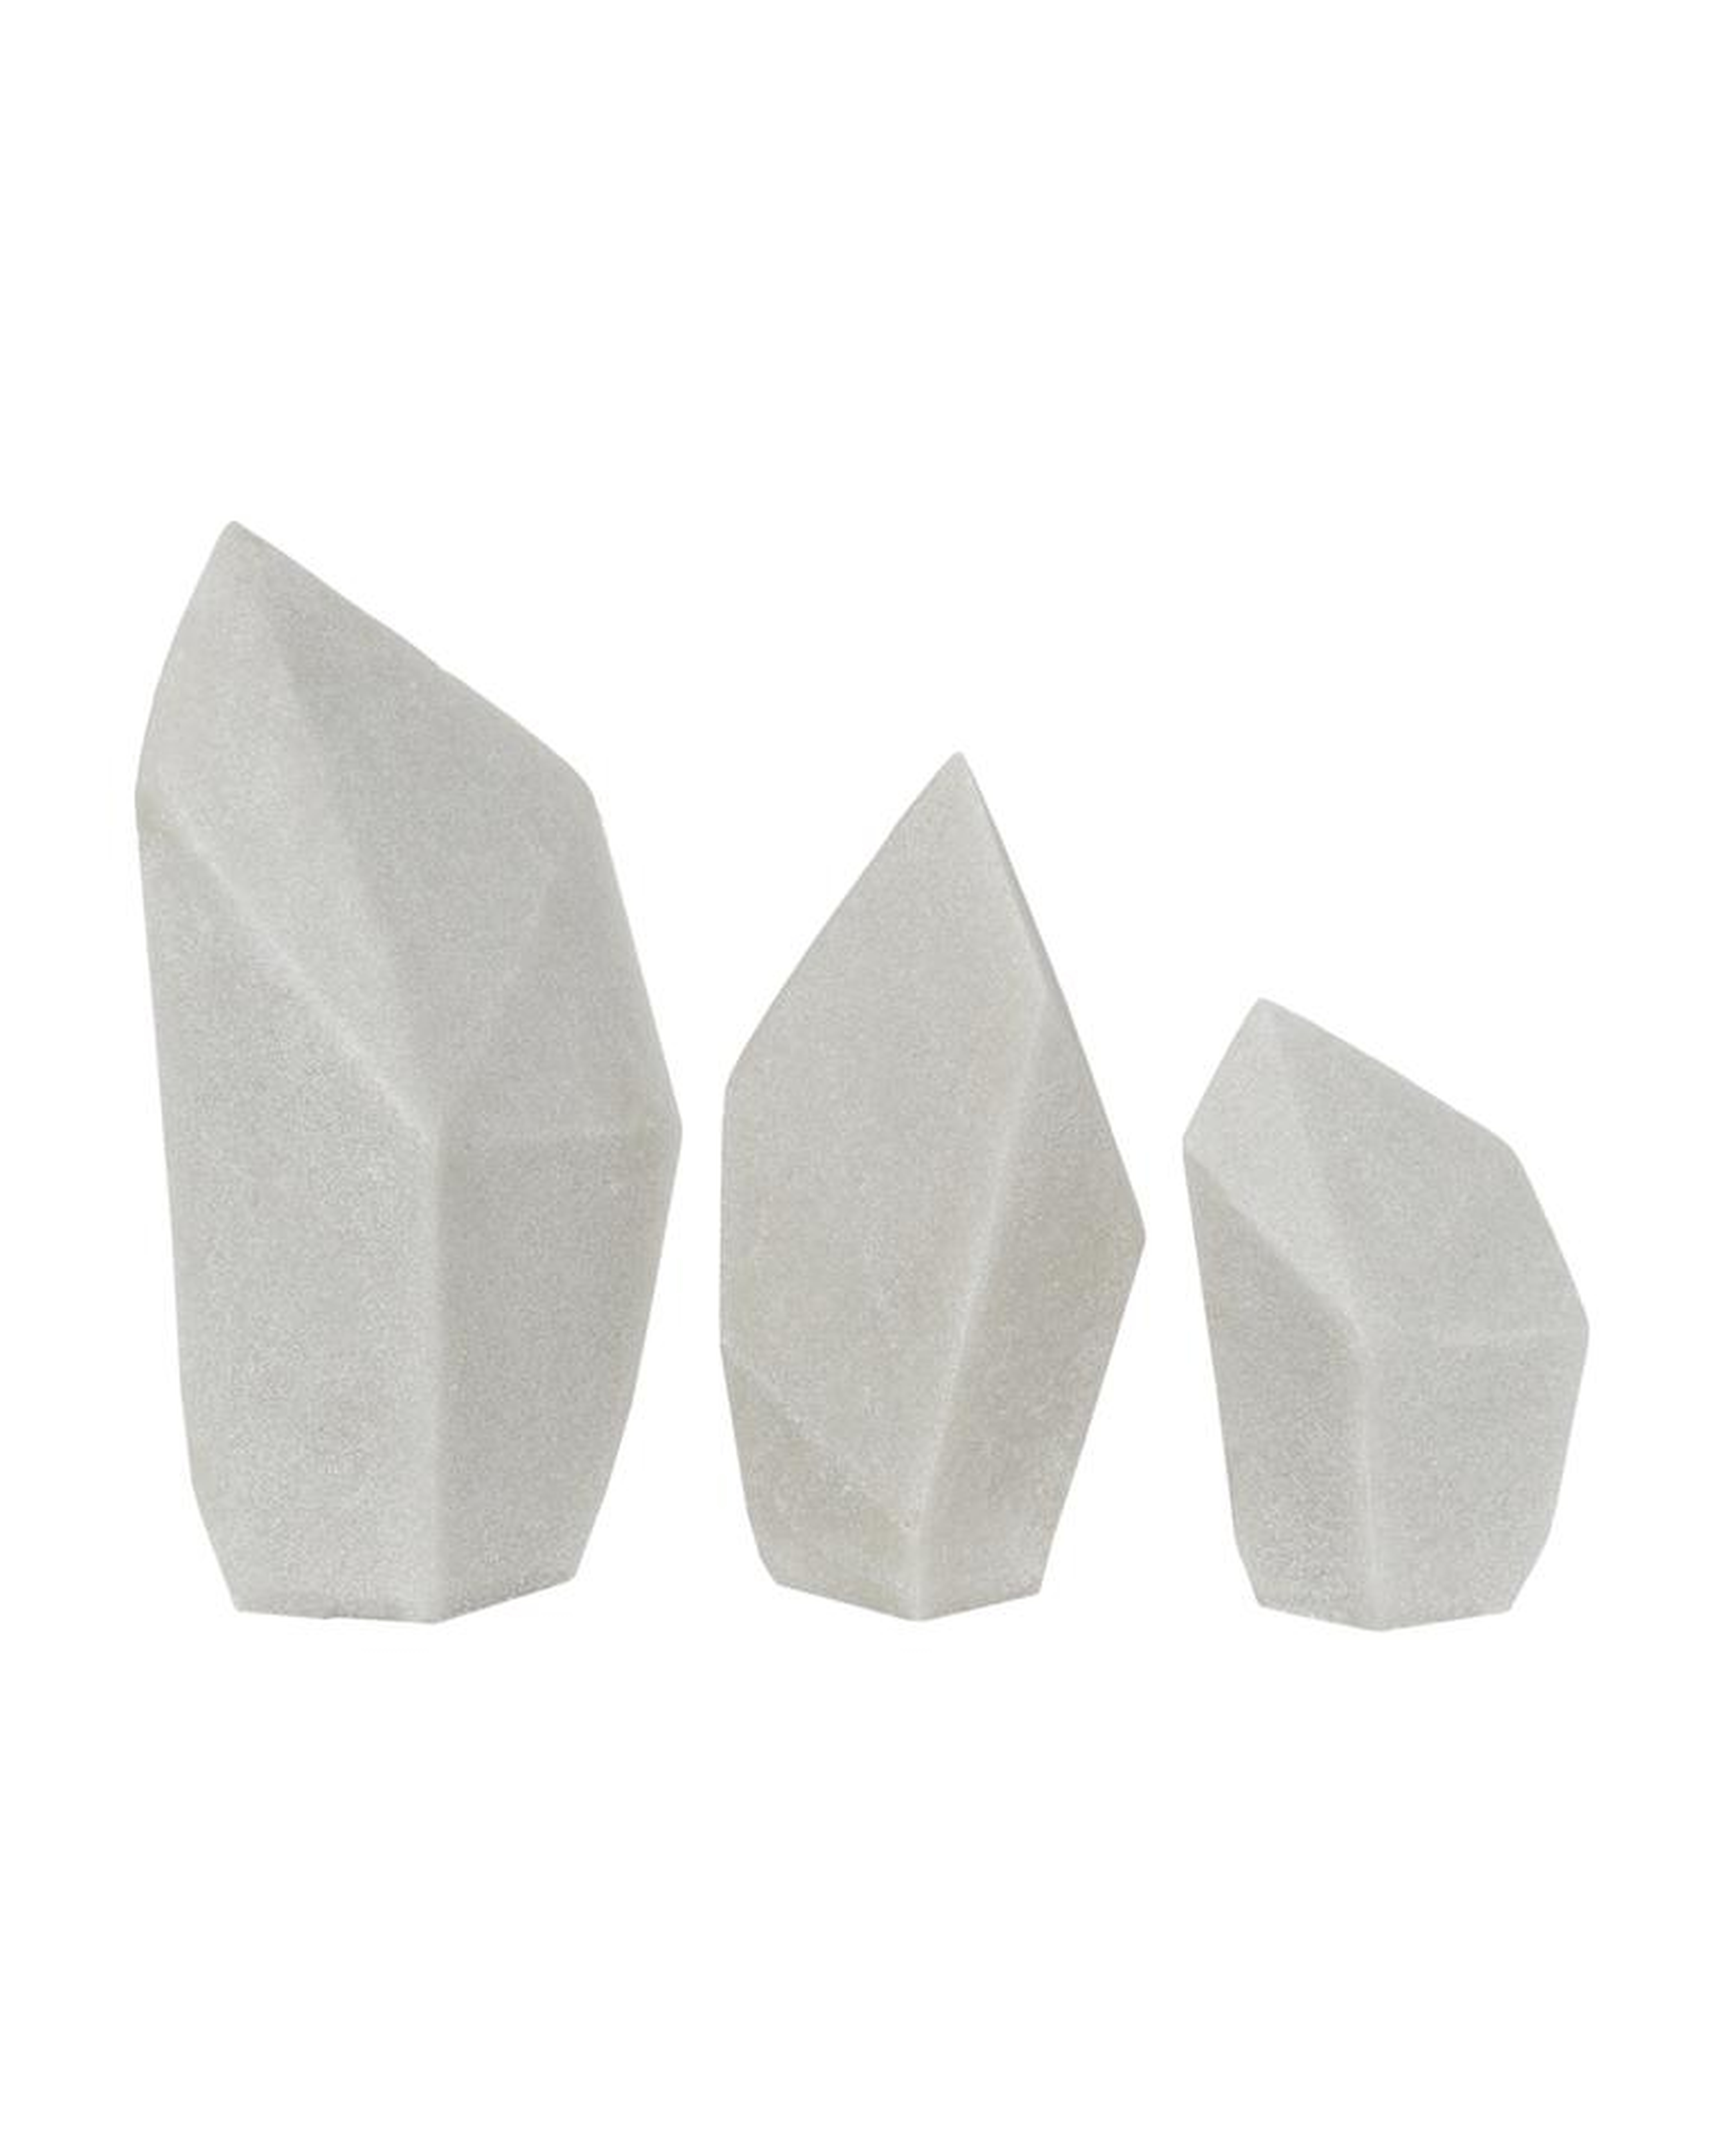 PRISM SCULPTURE (SET OF 3) - McGee & Co.